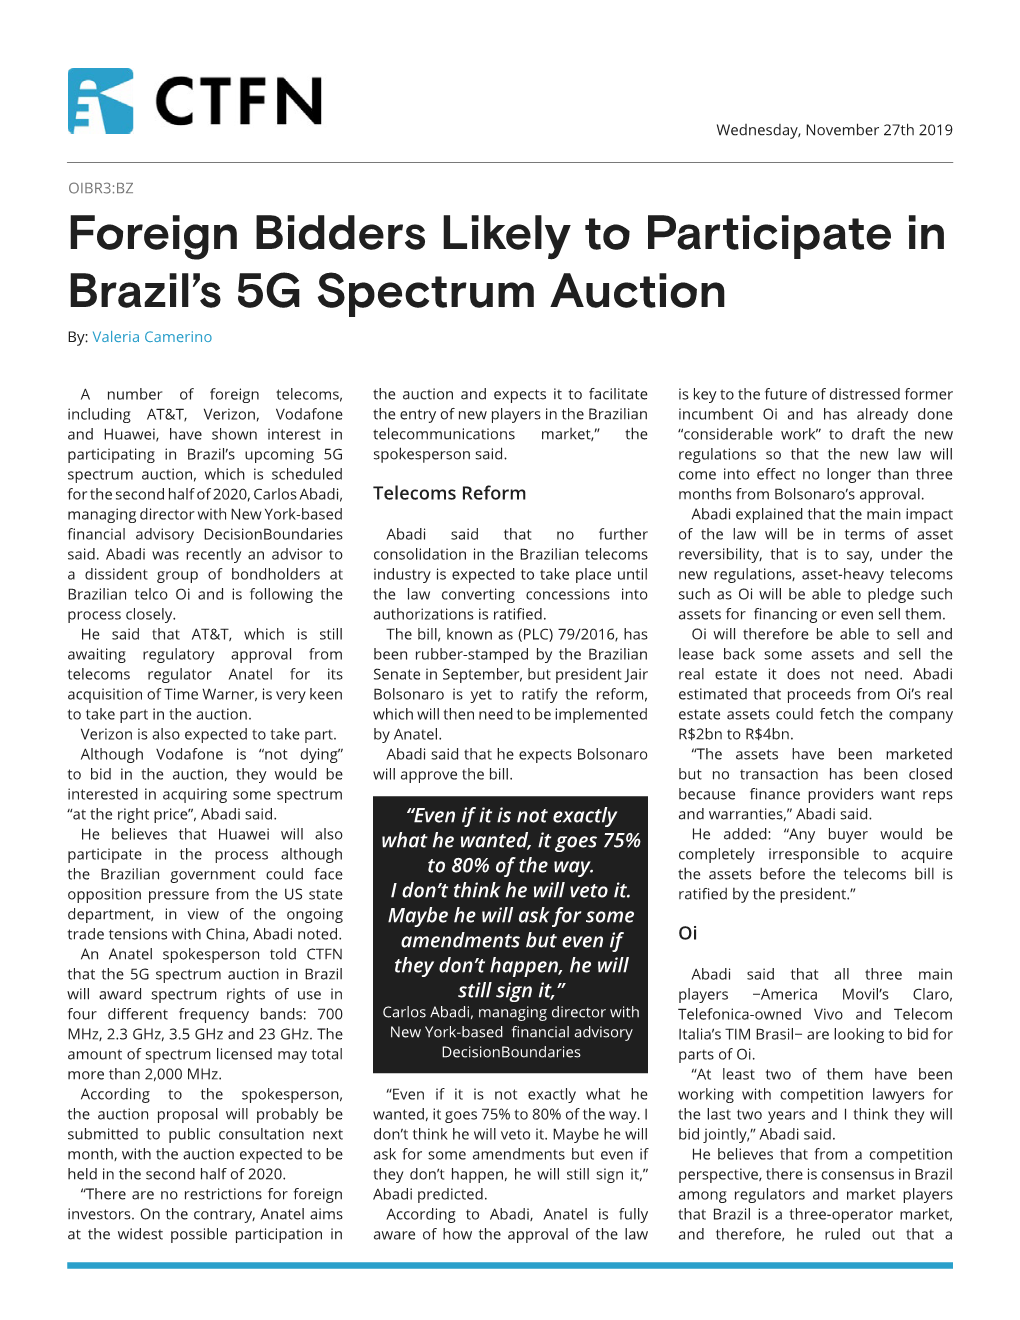 Foreign Bidders Likely to Participate in Brazil's 5G Spectrum Auction